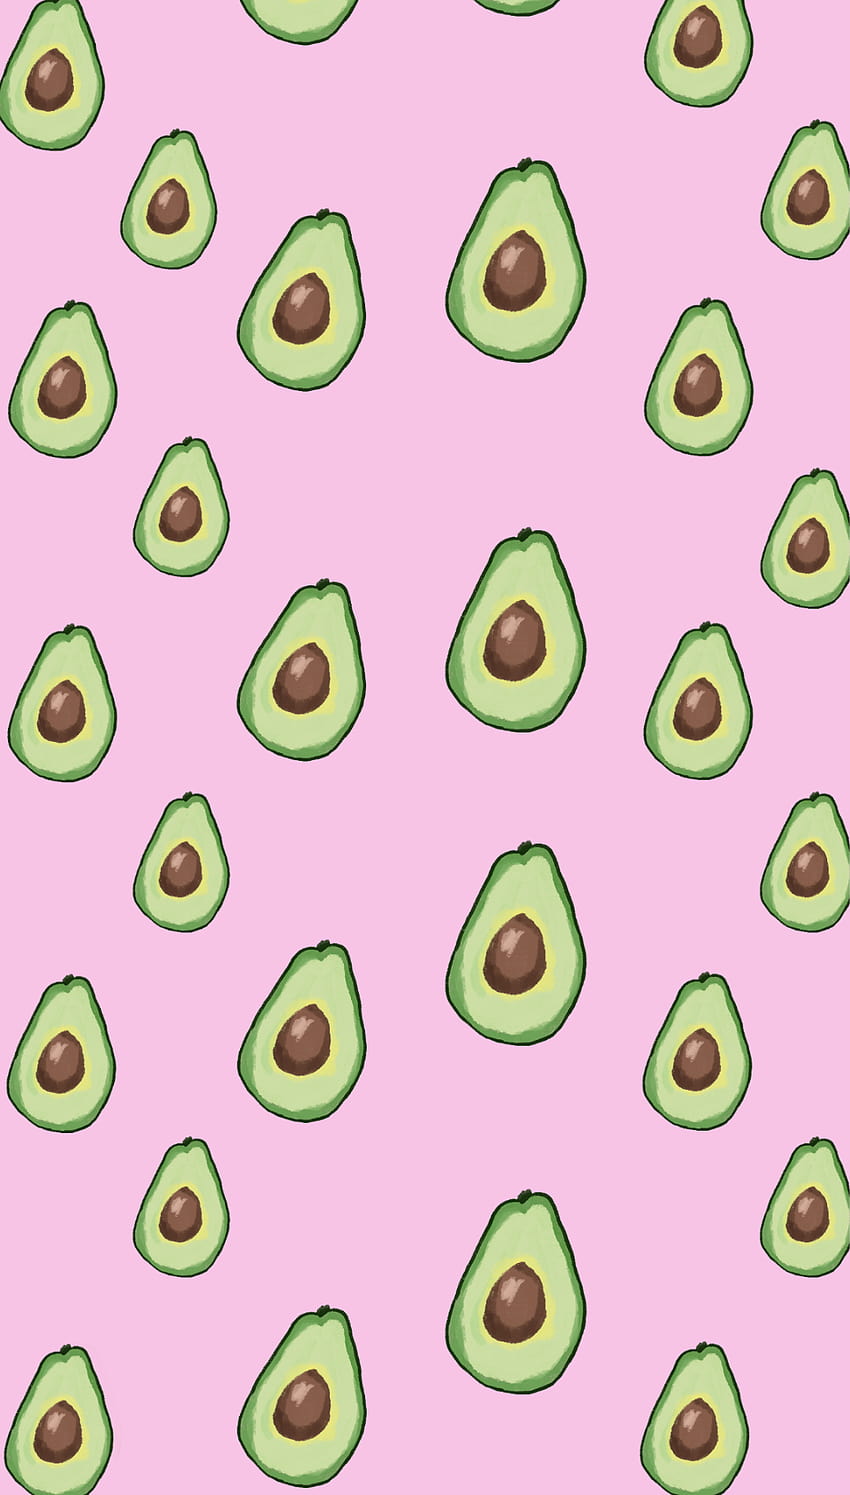 A pink background with avocados on it - Avocado